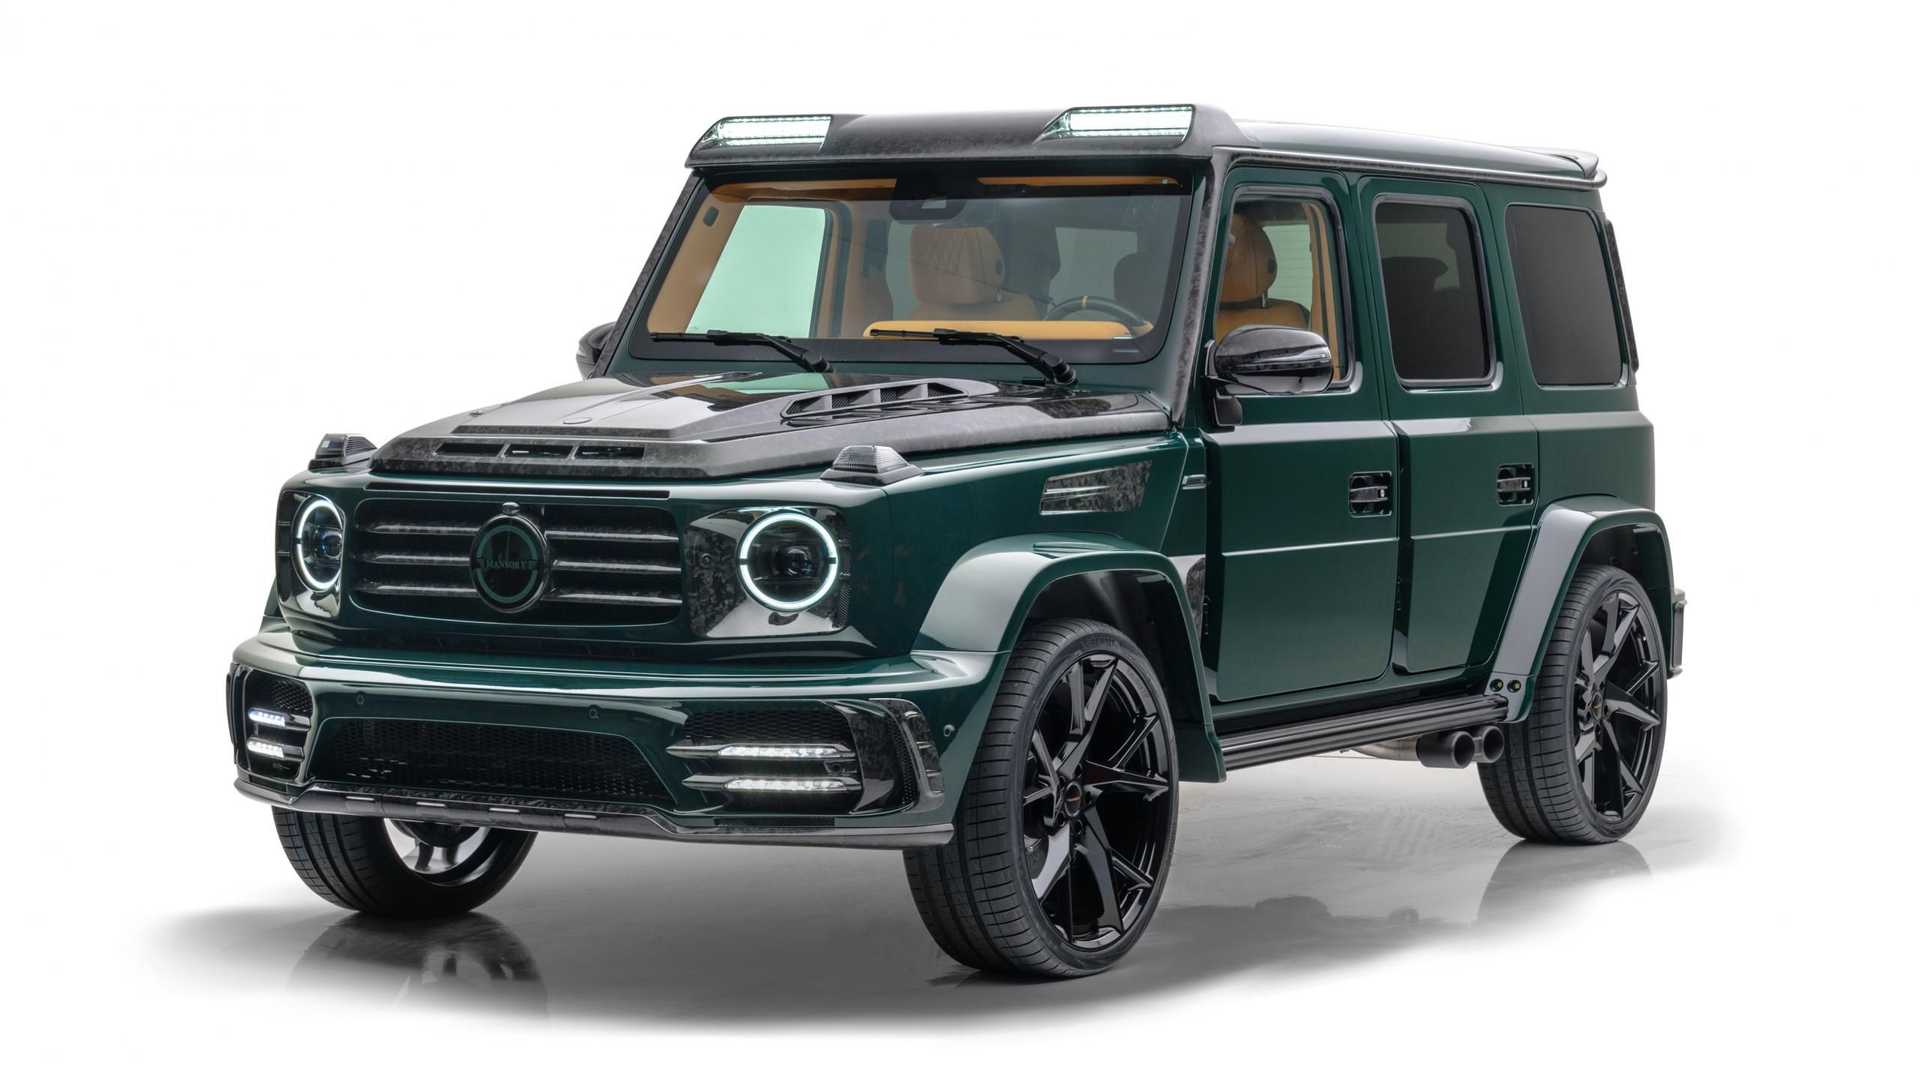 Mercedes AMG G63 Gronos By Mansory Is Tuning Opulence